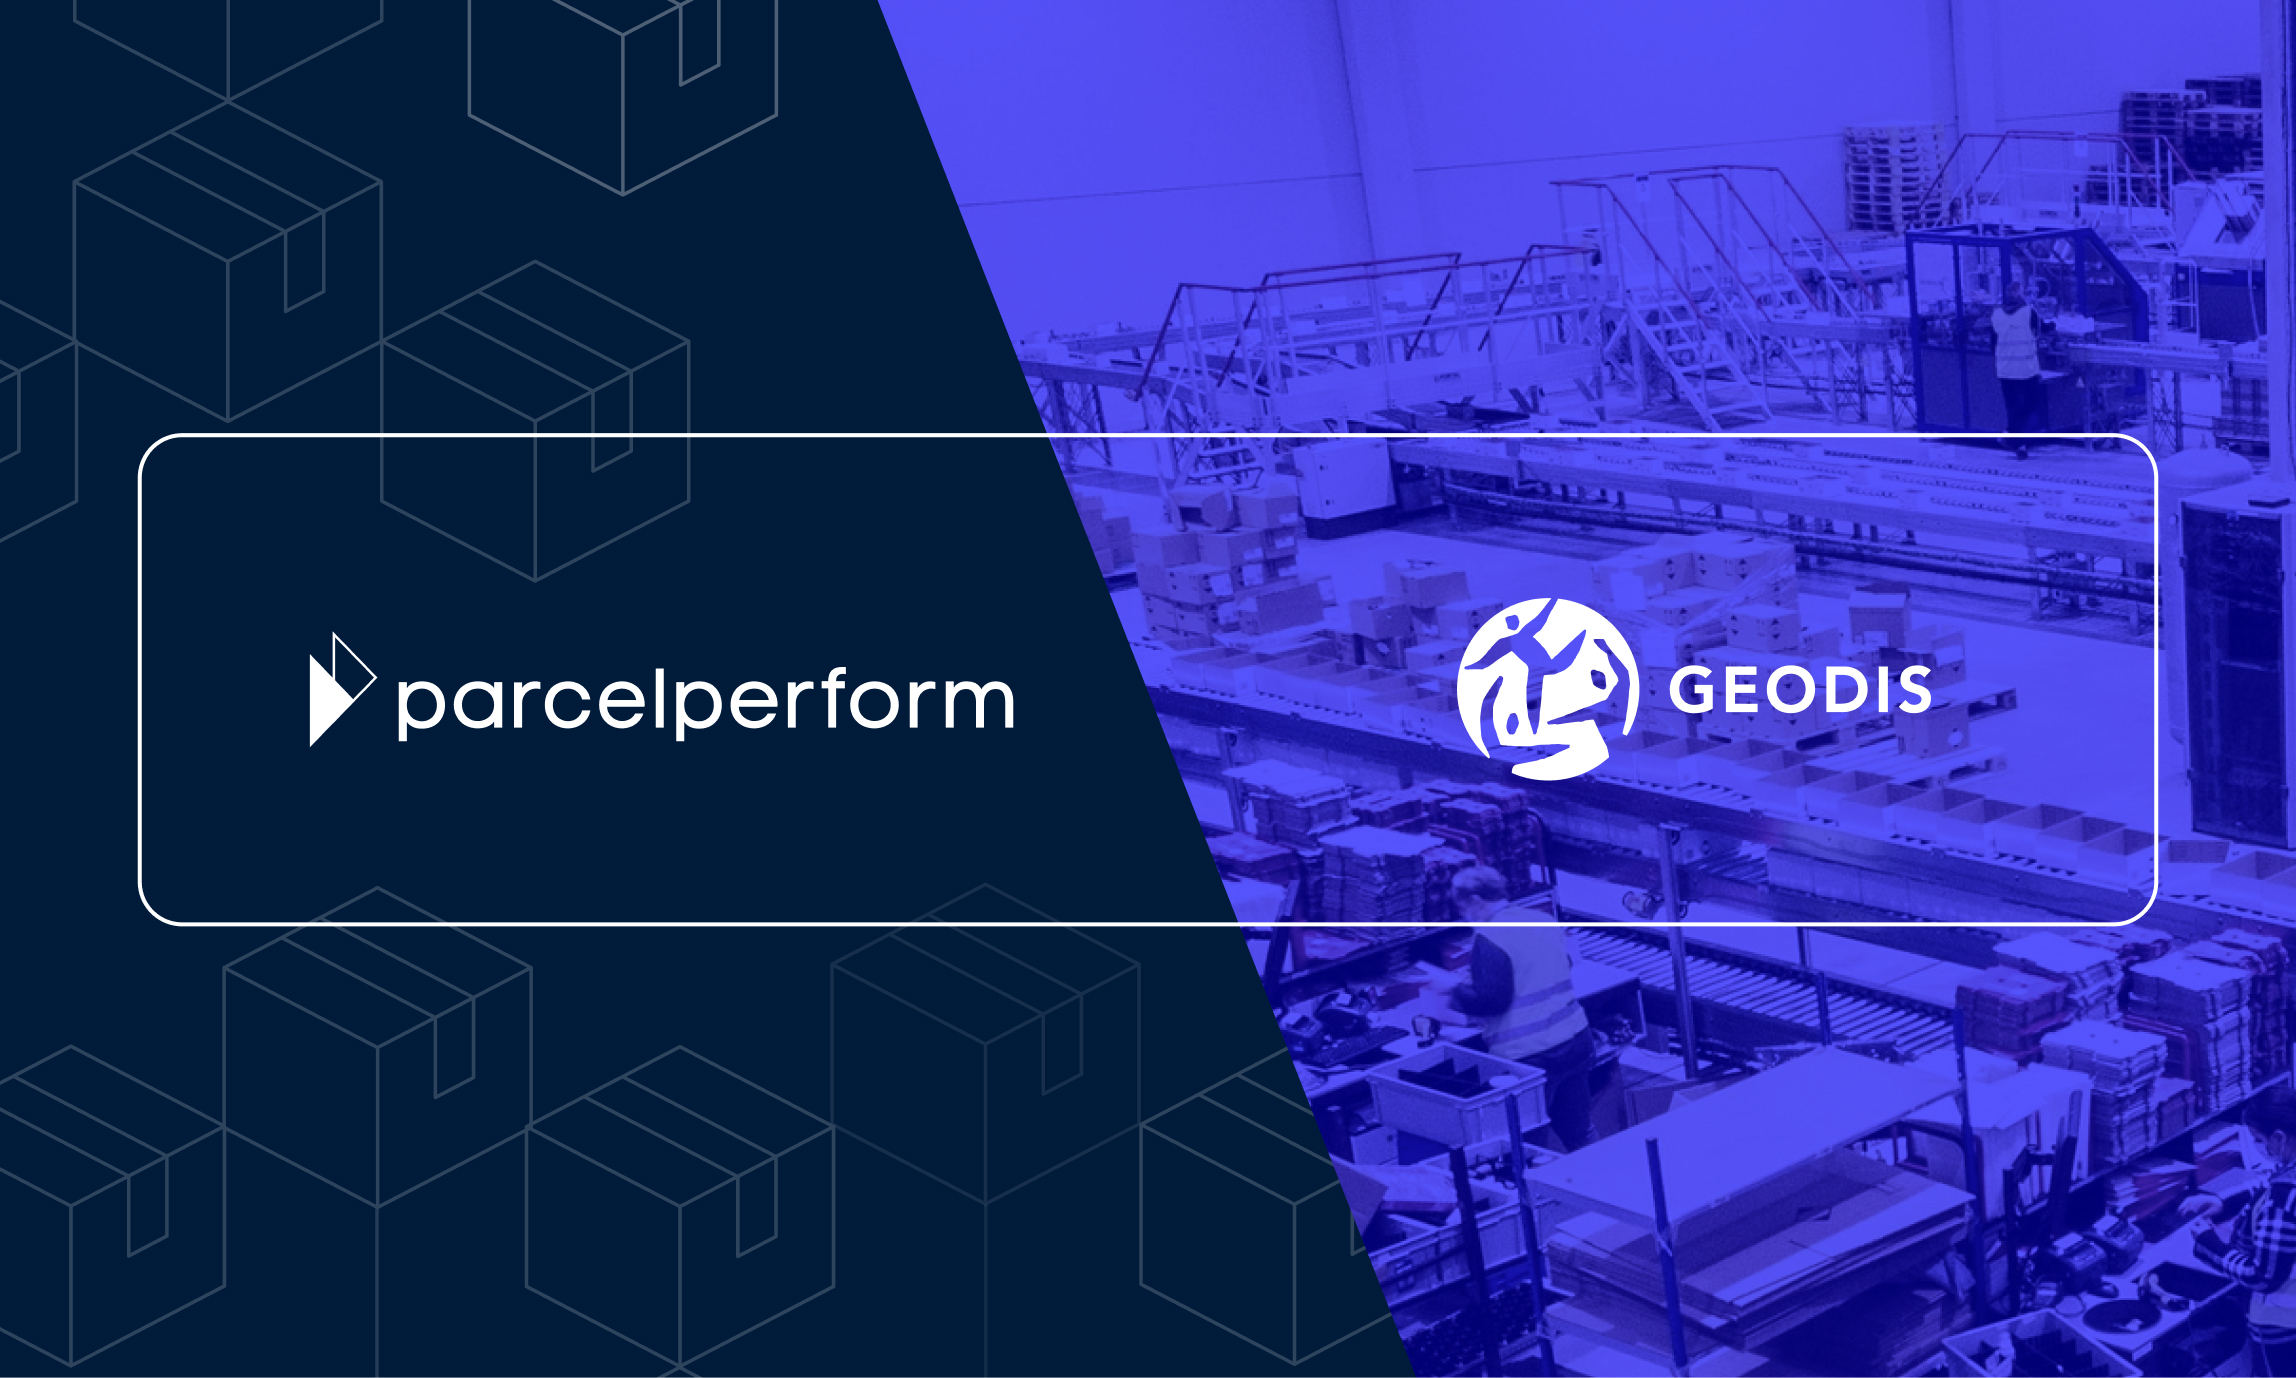 Partnership announcement between parcel perform and geodis. image is a composite image of parcel perform and geodis logo. Geodis logo has blue image of warehouse as background. 